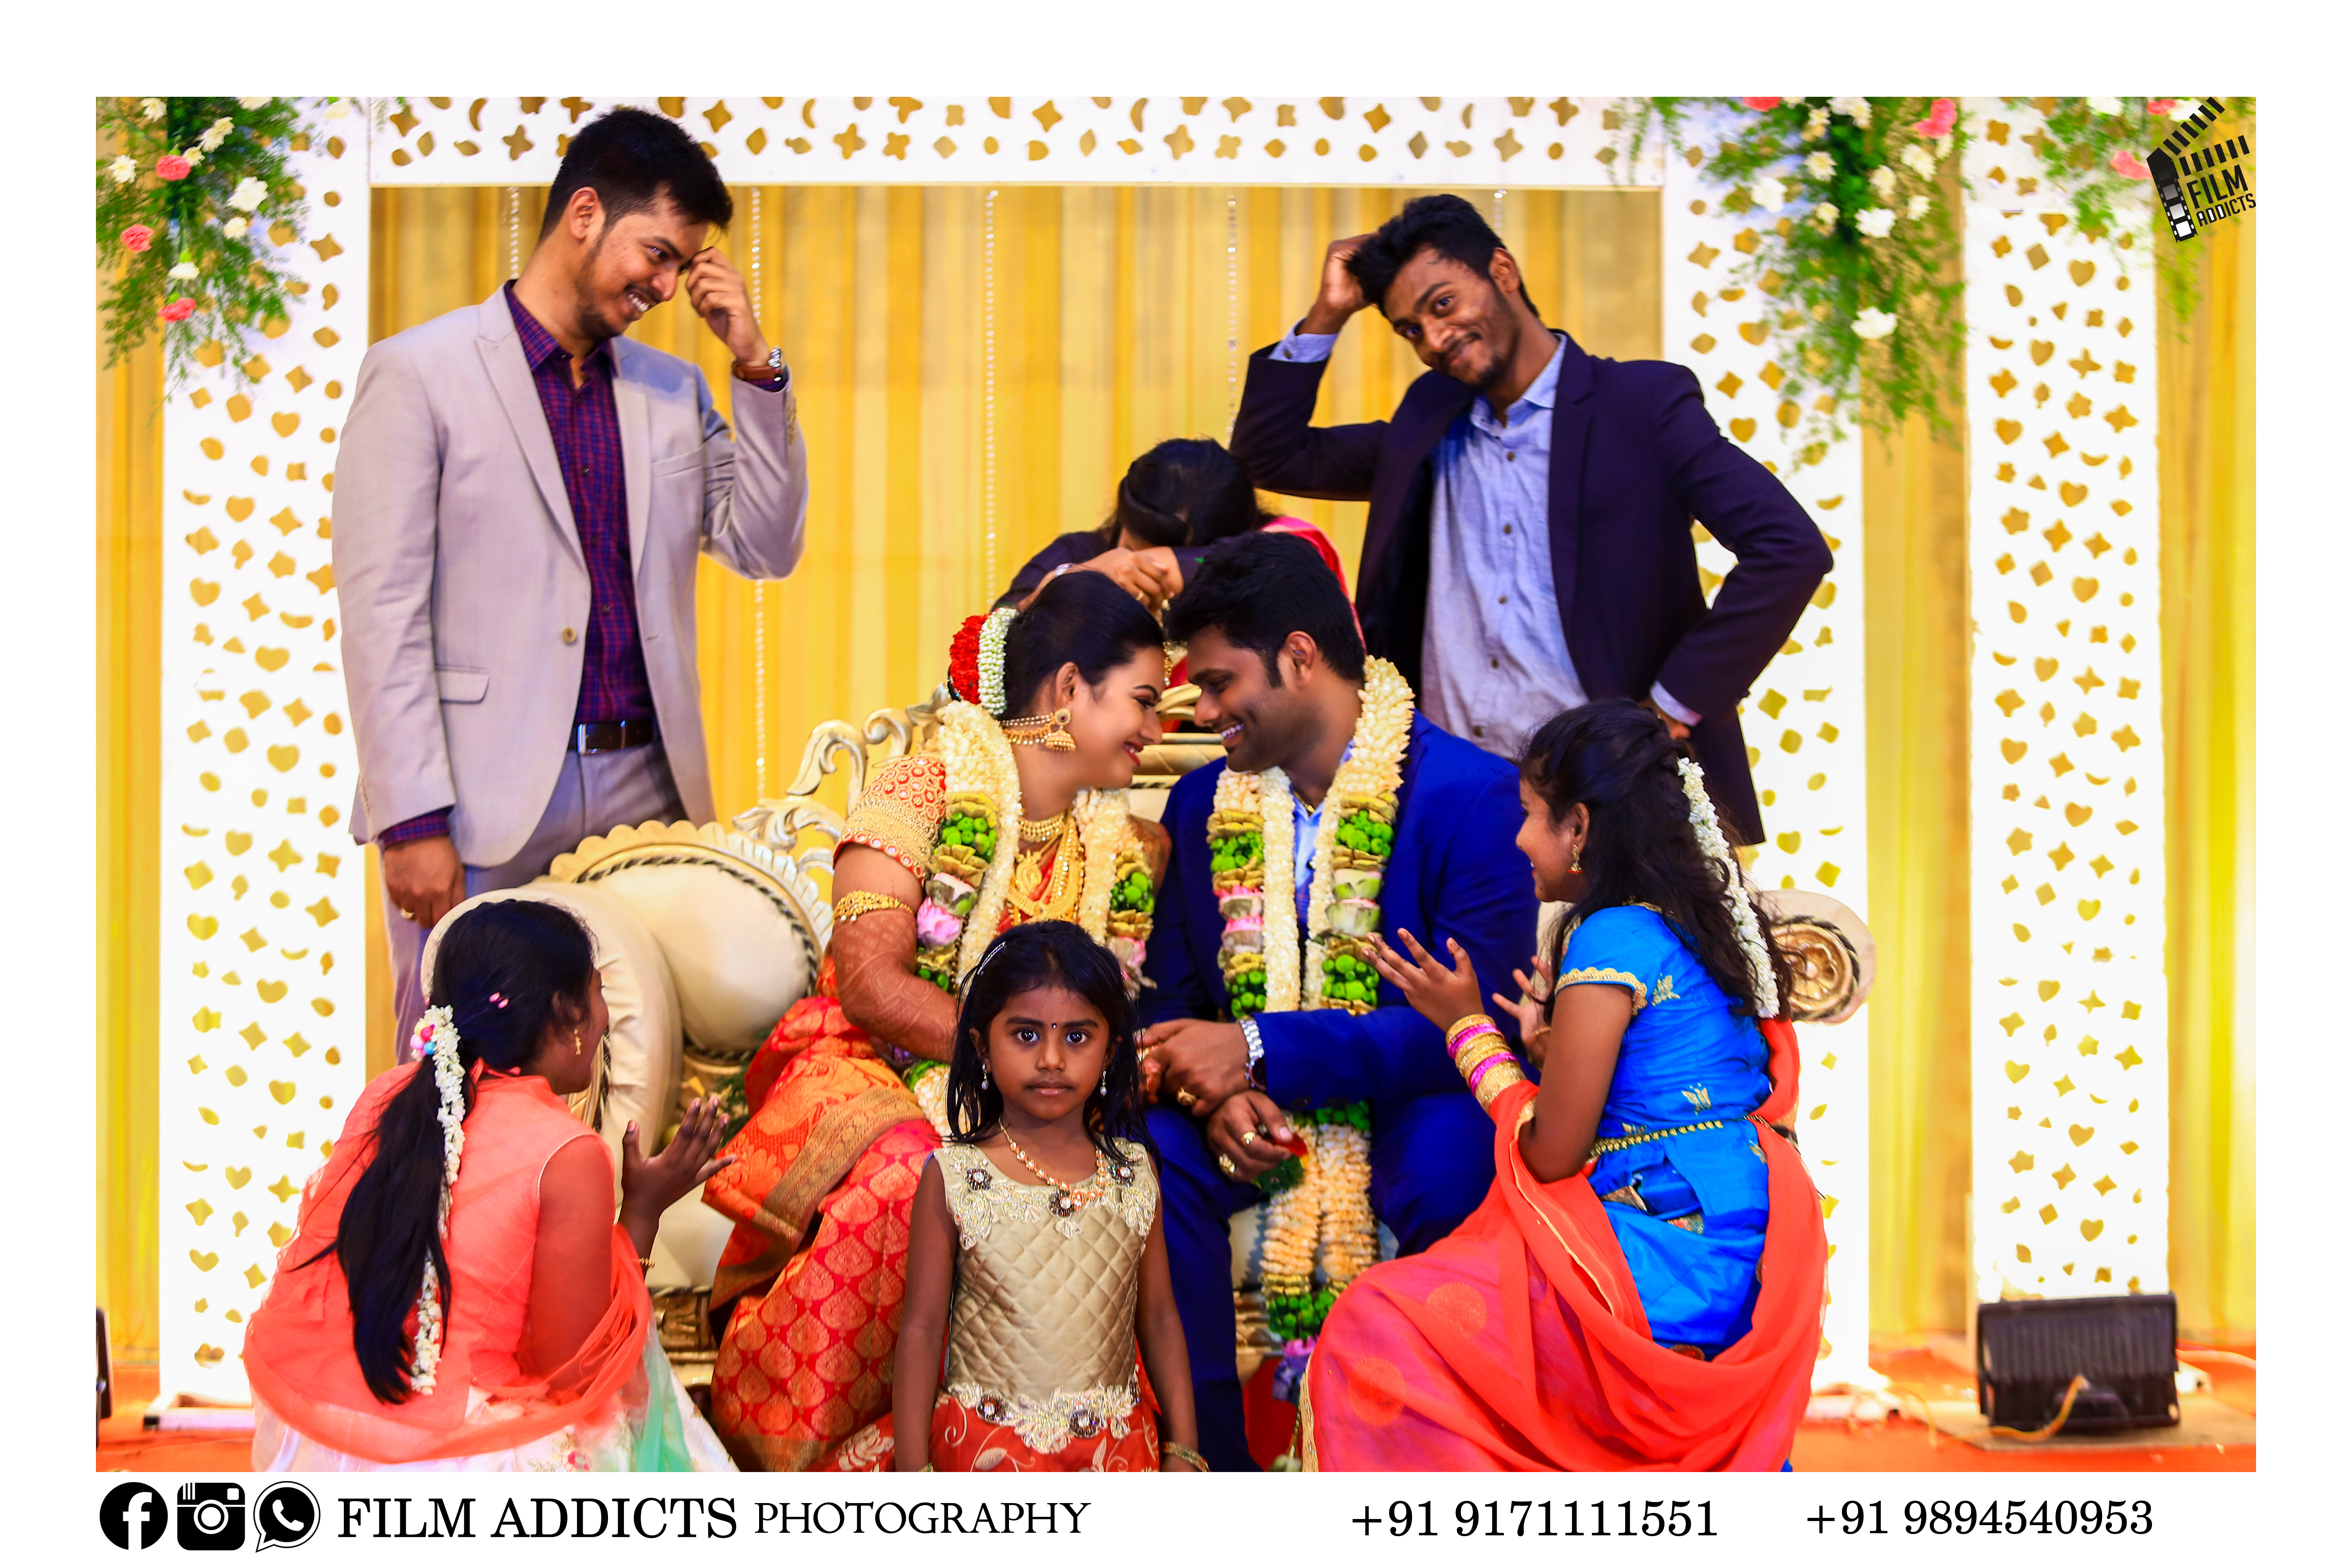 best-candid-photographers-in-karur,Candid-photography-in-karur,best-wedding -photography-in-karur,Best-candid-photography-inb-karur,Best-candid-photographer,candid-photographer-in-karur,drone-photographer-in-karur,helicam-photographer-in-karur,candid-wedding-photographers-in-karur,photographers-in-karur,professional-wedding-photographers-in-karur,top-wedding-filmmakers-in-karur,wedding-cinematographers-in-karur,wedding-cinimatography-in-karur,wedding-photographers-in-karur,wedding-teaser-in-karur, asian-wedding-photography-in-karur, best-candid-photographers-in-karur, best-candid-videographers-in-karur,best-photographers-in-karur best-wedding-photographers-in-karur,best-nadar-wedding-photography-in-karur,candid-photographers-in-karur,destination-wedding-photographers-in-karur,fashion-photographers-in-karur, karur-famous-stage-decorations